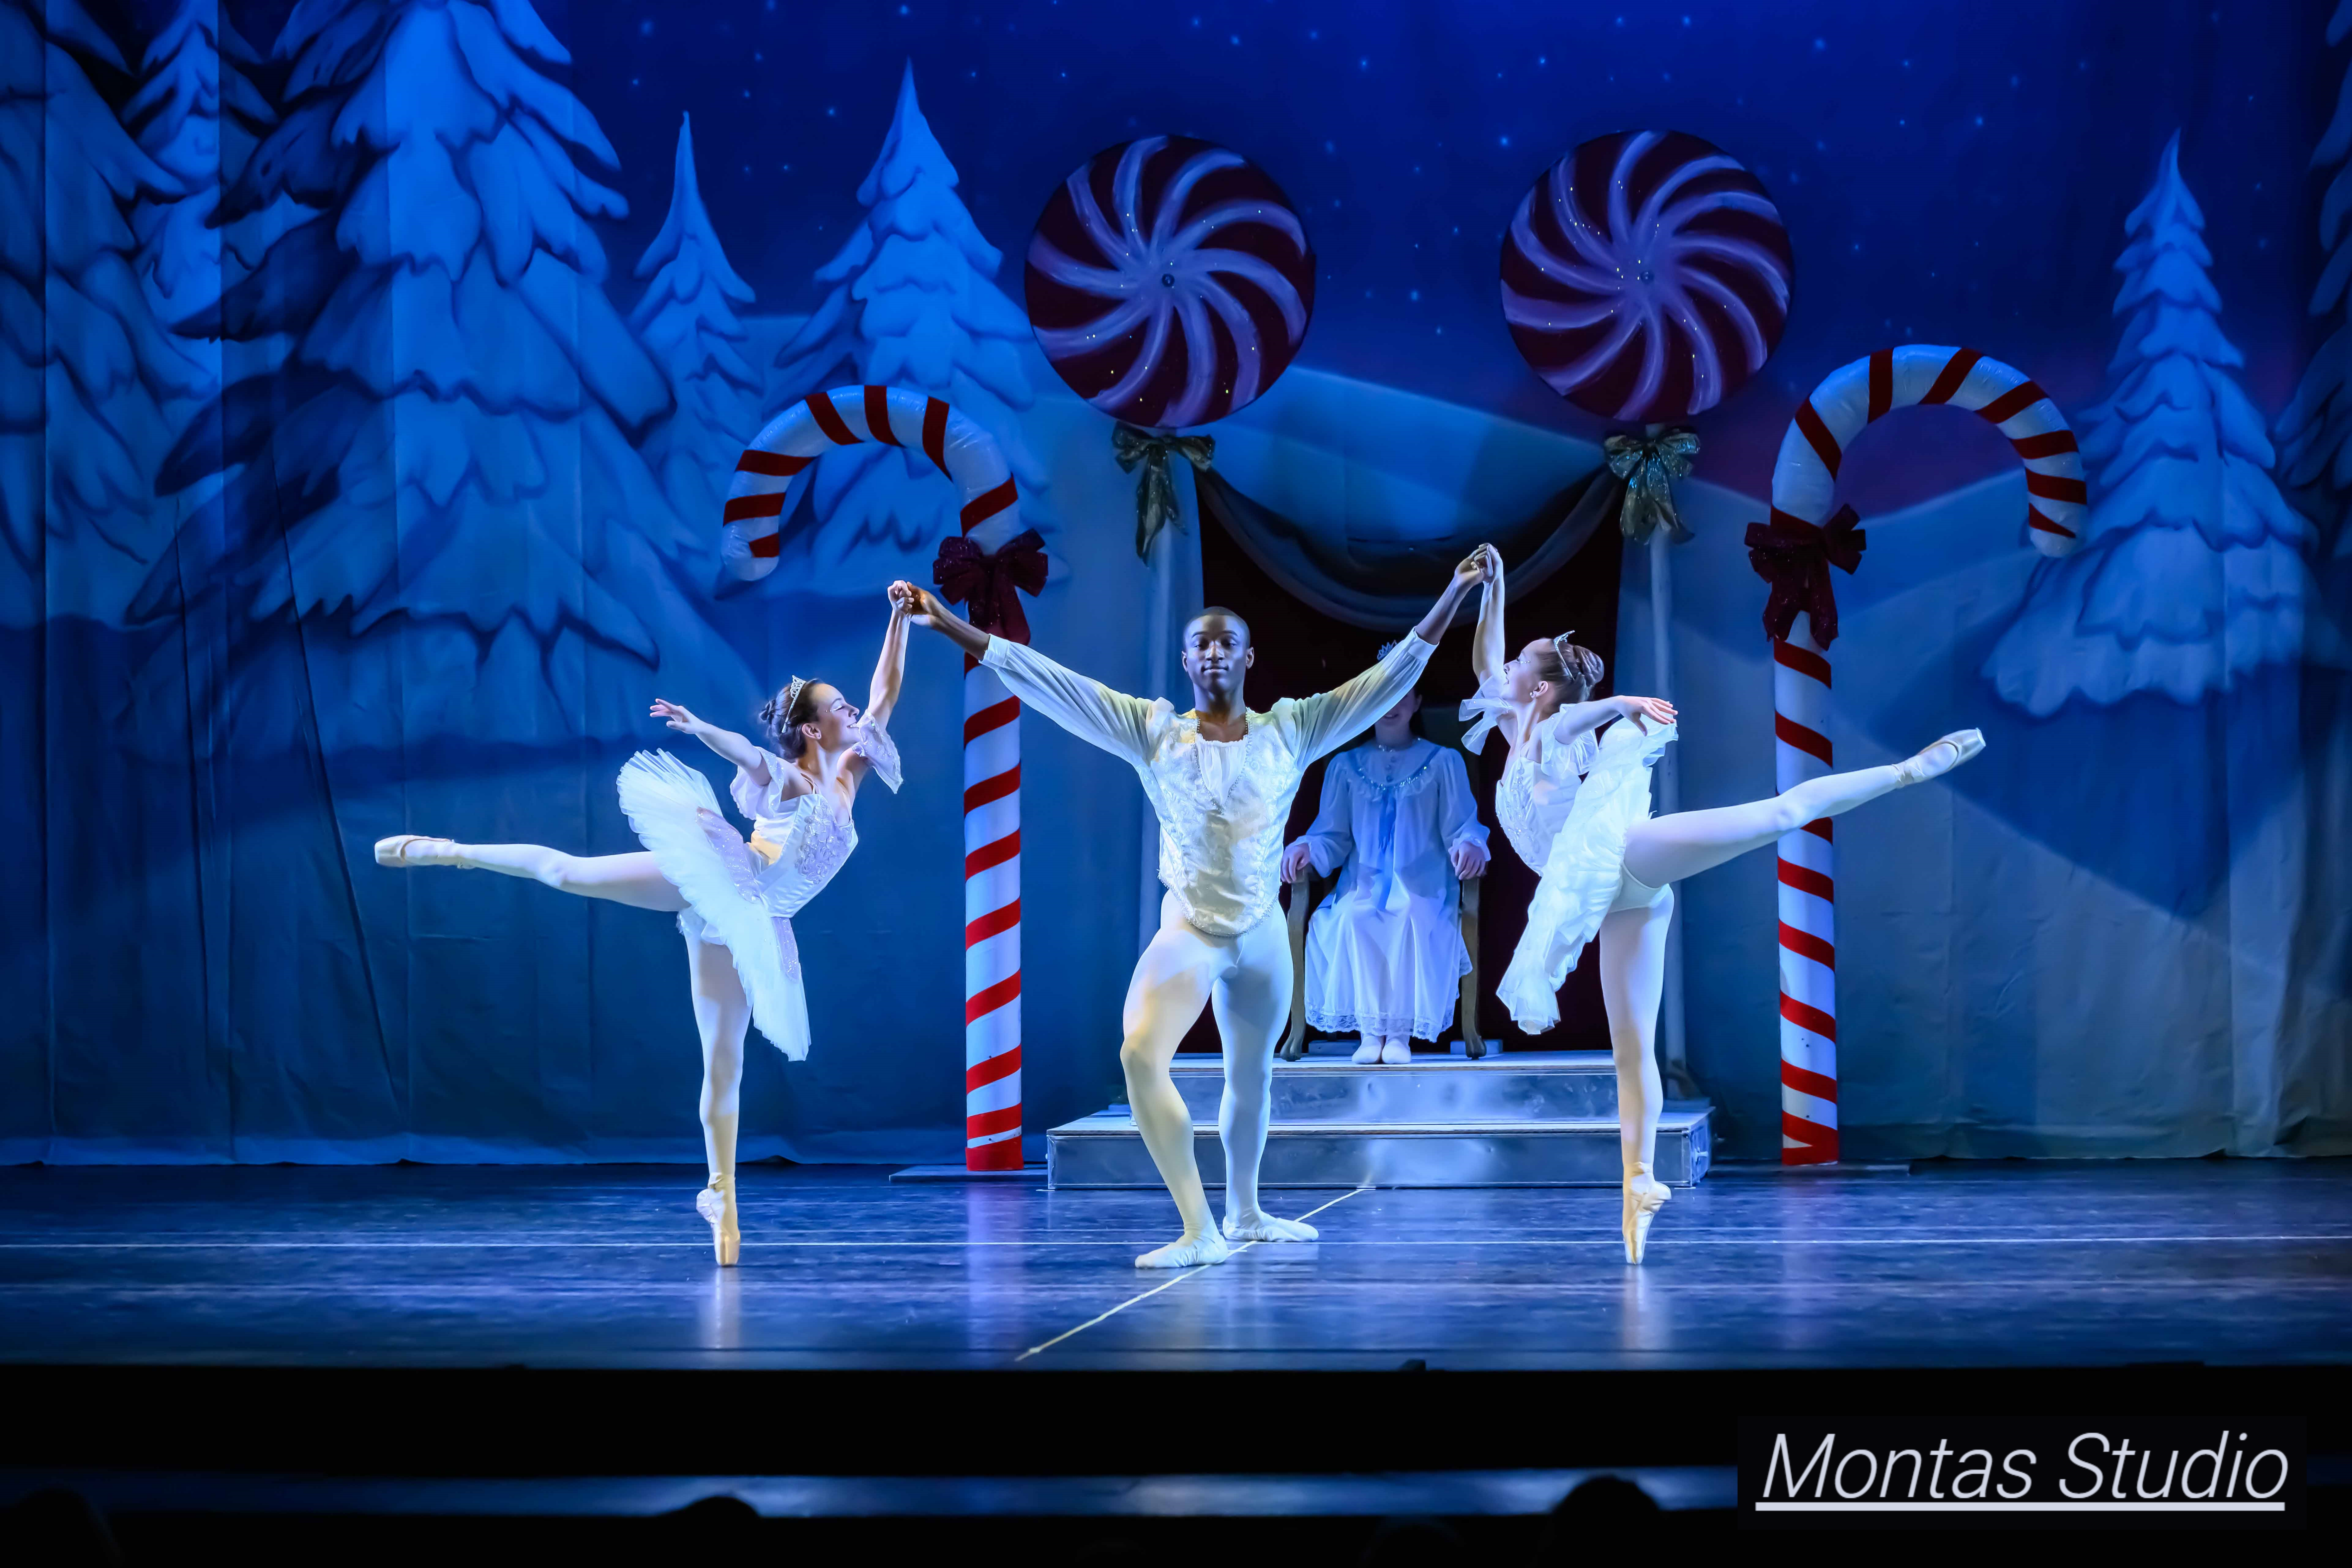 Our students performing Nutcracker ballet